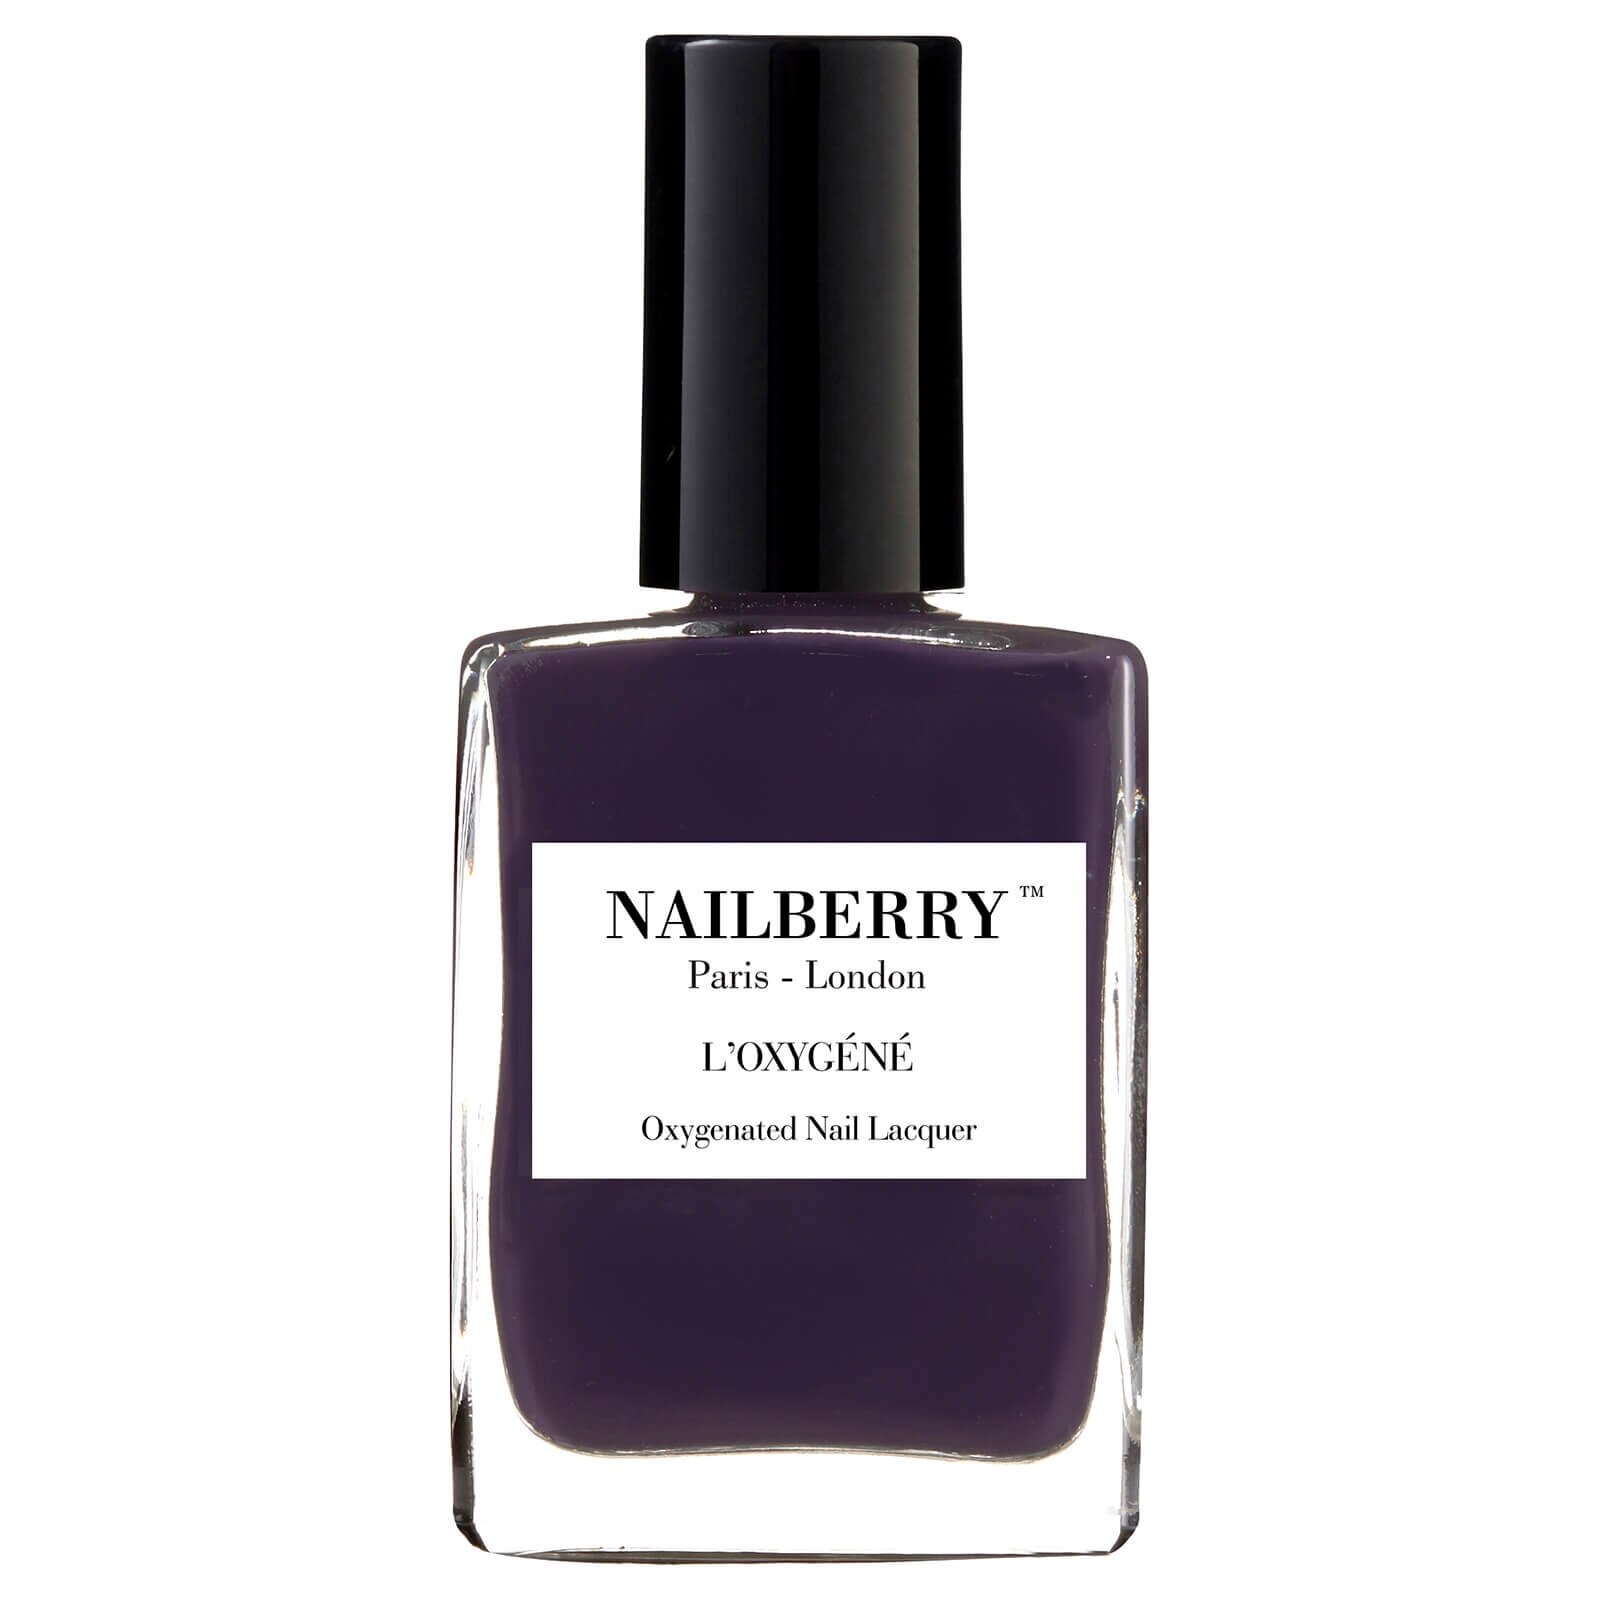 Nailberry 'Blueberry', £15